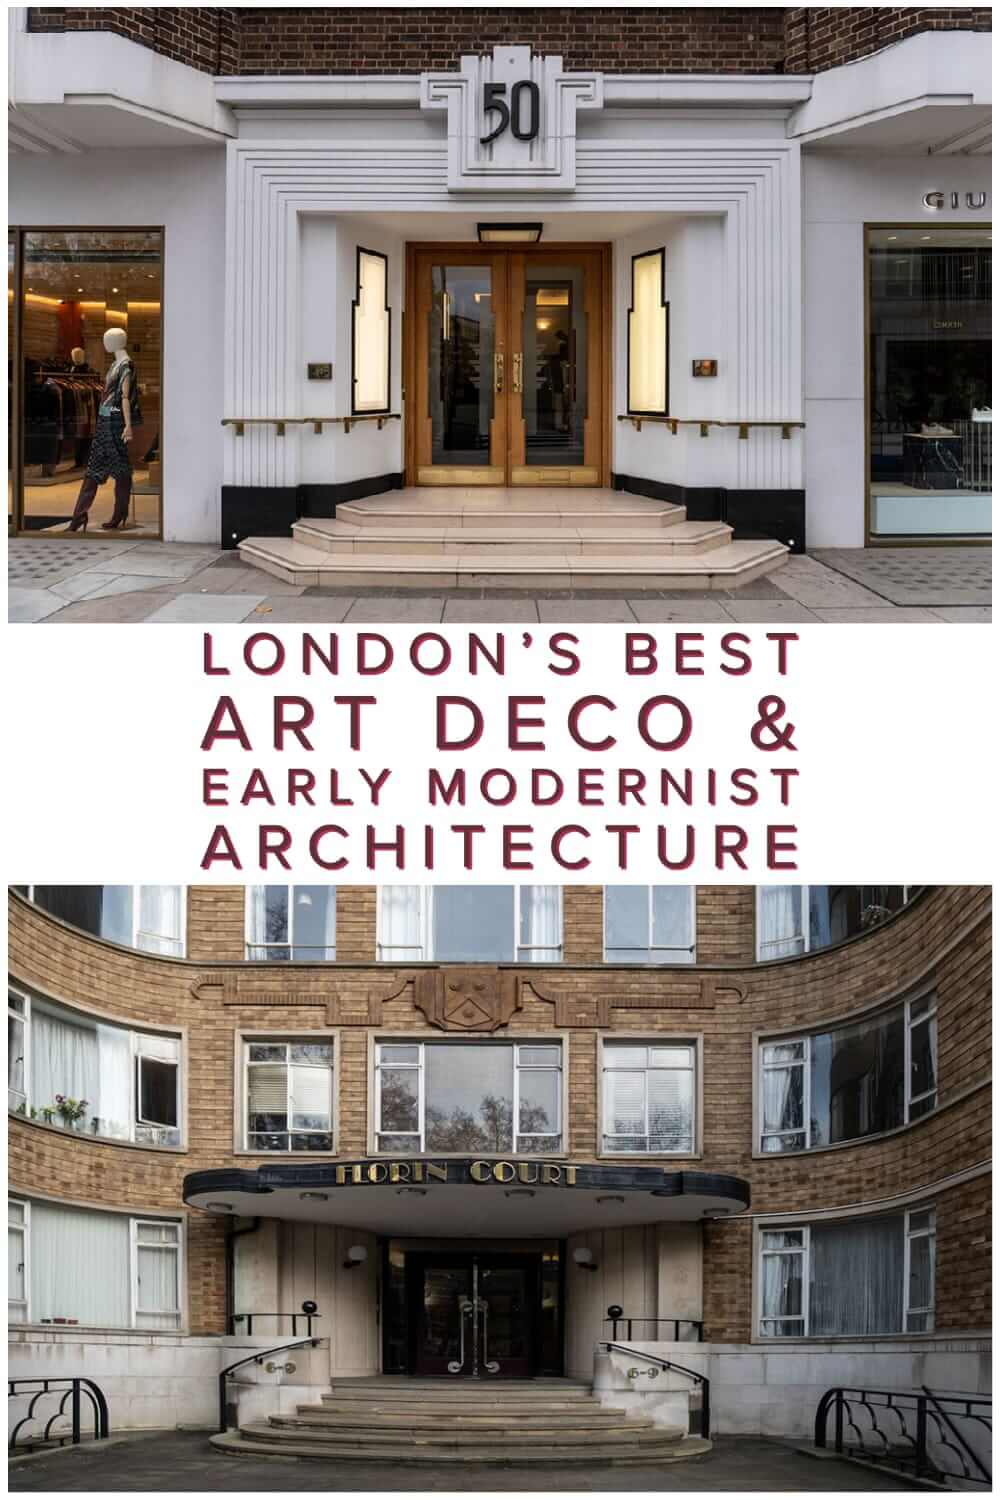 Photographs of London’s best Art Deco and early modernist architecture, a distinctive style that took off in Britain in the 1920s and 1930s #England #UK